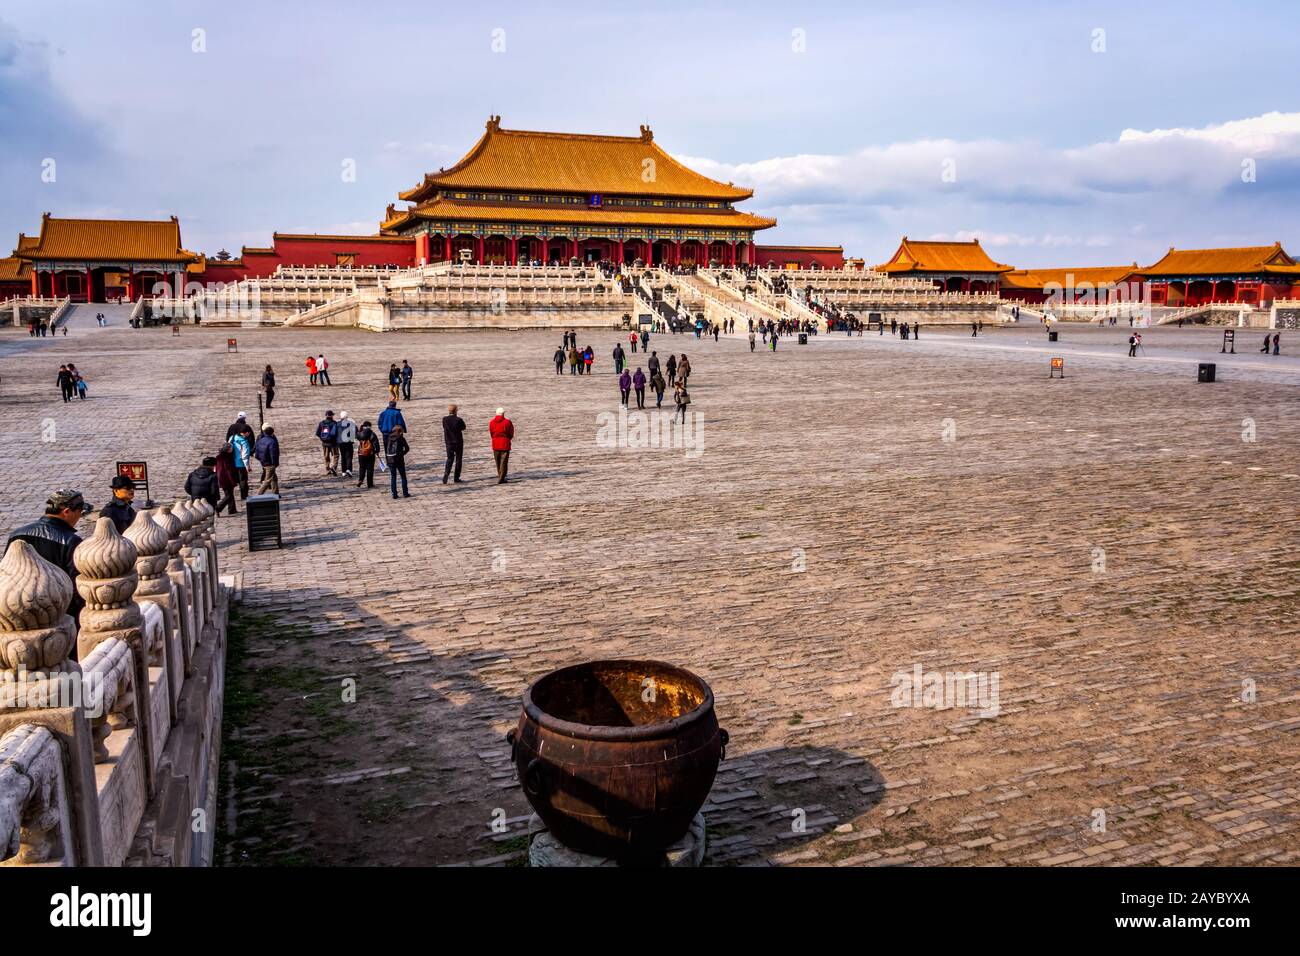 Multiple tourists visiting Forbidden City, front view on central square and temples Stock Photo